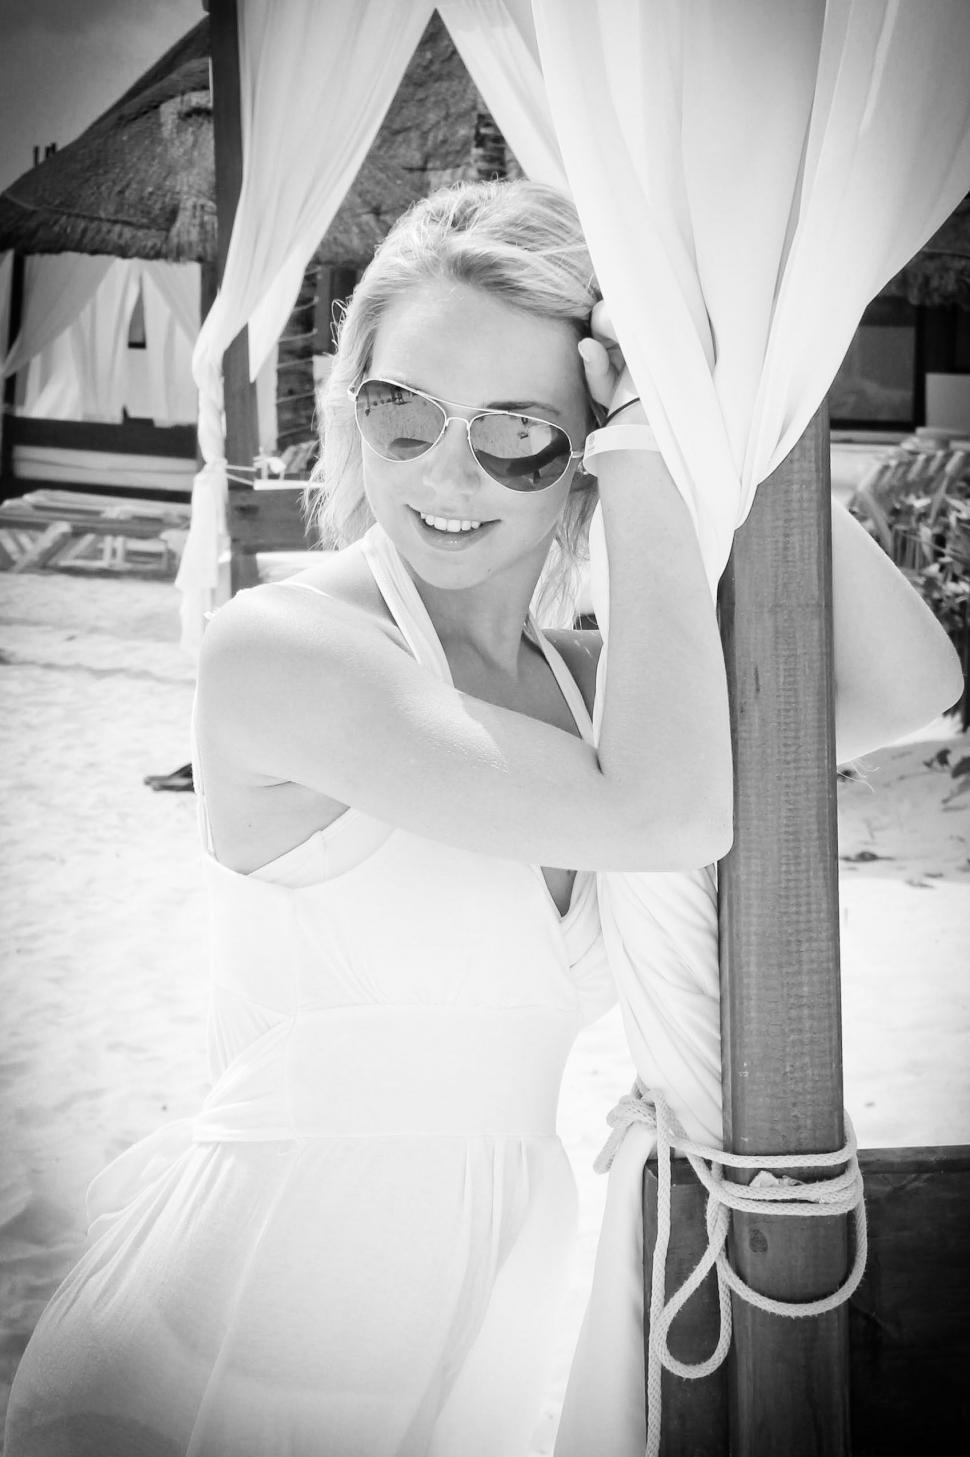 Free Image of Woman in white dress by beach cabana 